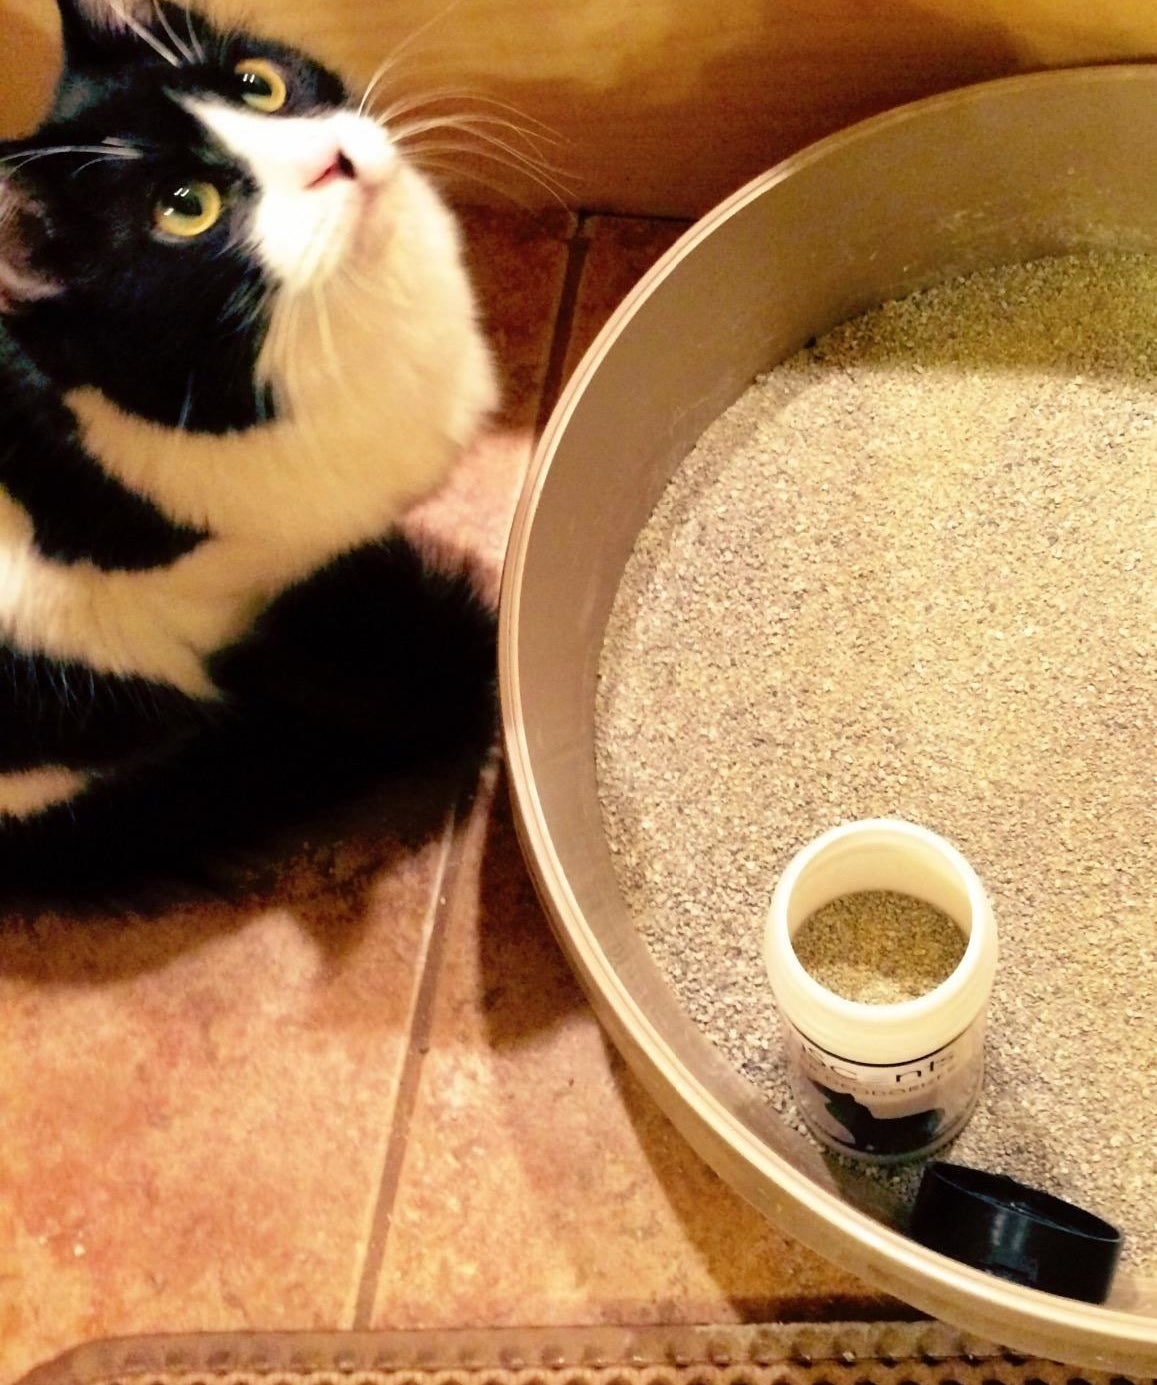 A reviewer photo of a cat looking up next to a litter box with a bottle of odor destroyer in it